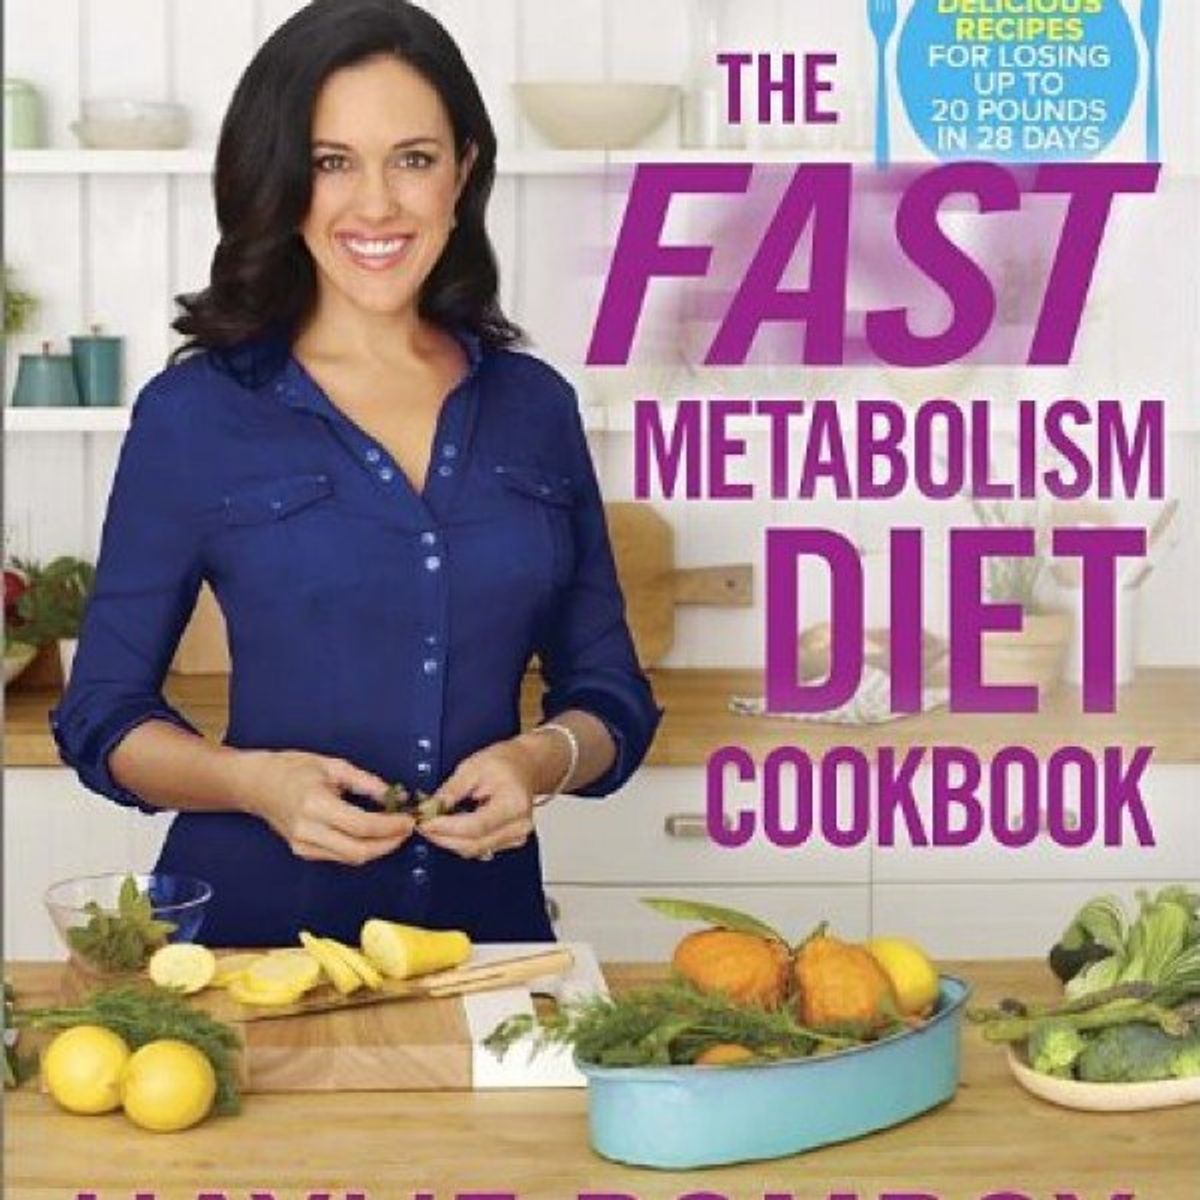 How The Fast Metabolism Diet Changed My Life